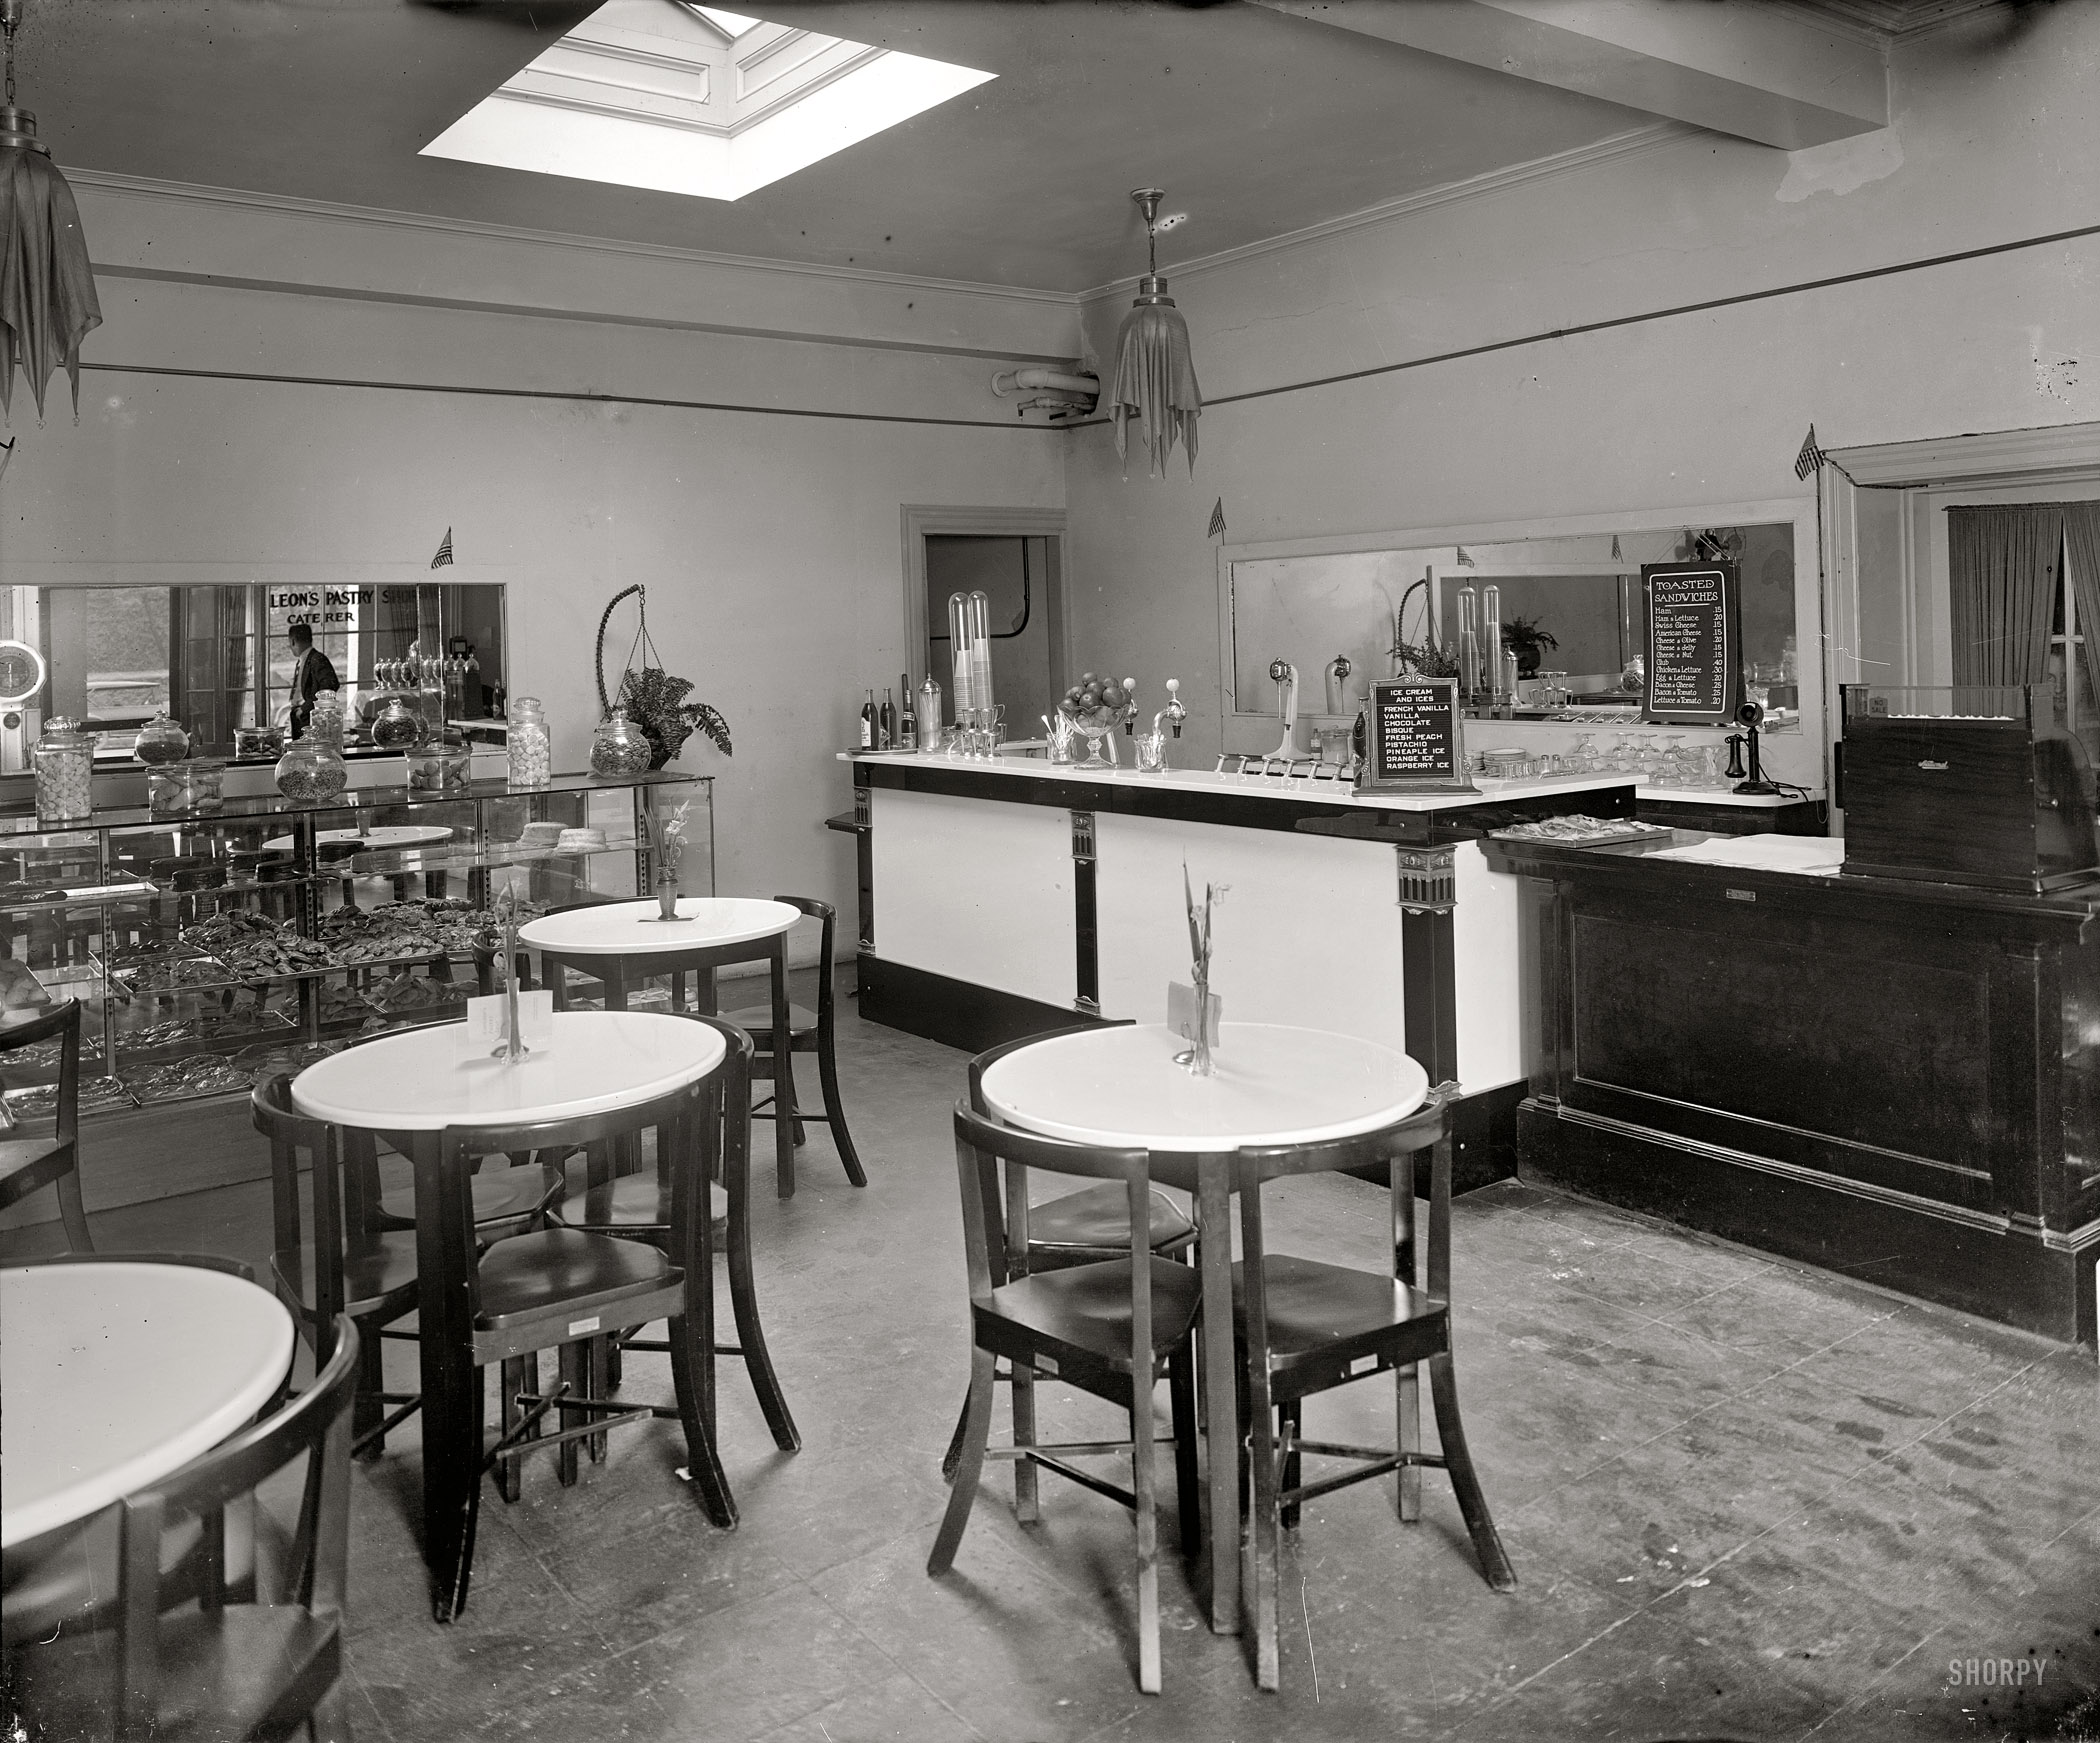 Washington, D.C., circa 1924. "Cathedral Mansions, bakery," 3000 Connecticut Avenue. National Photo Company Collection glass negative. View full size.